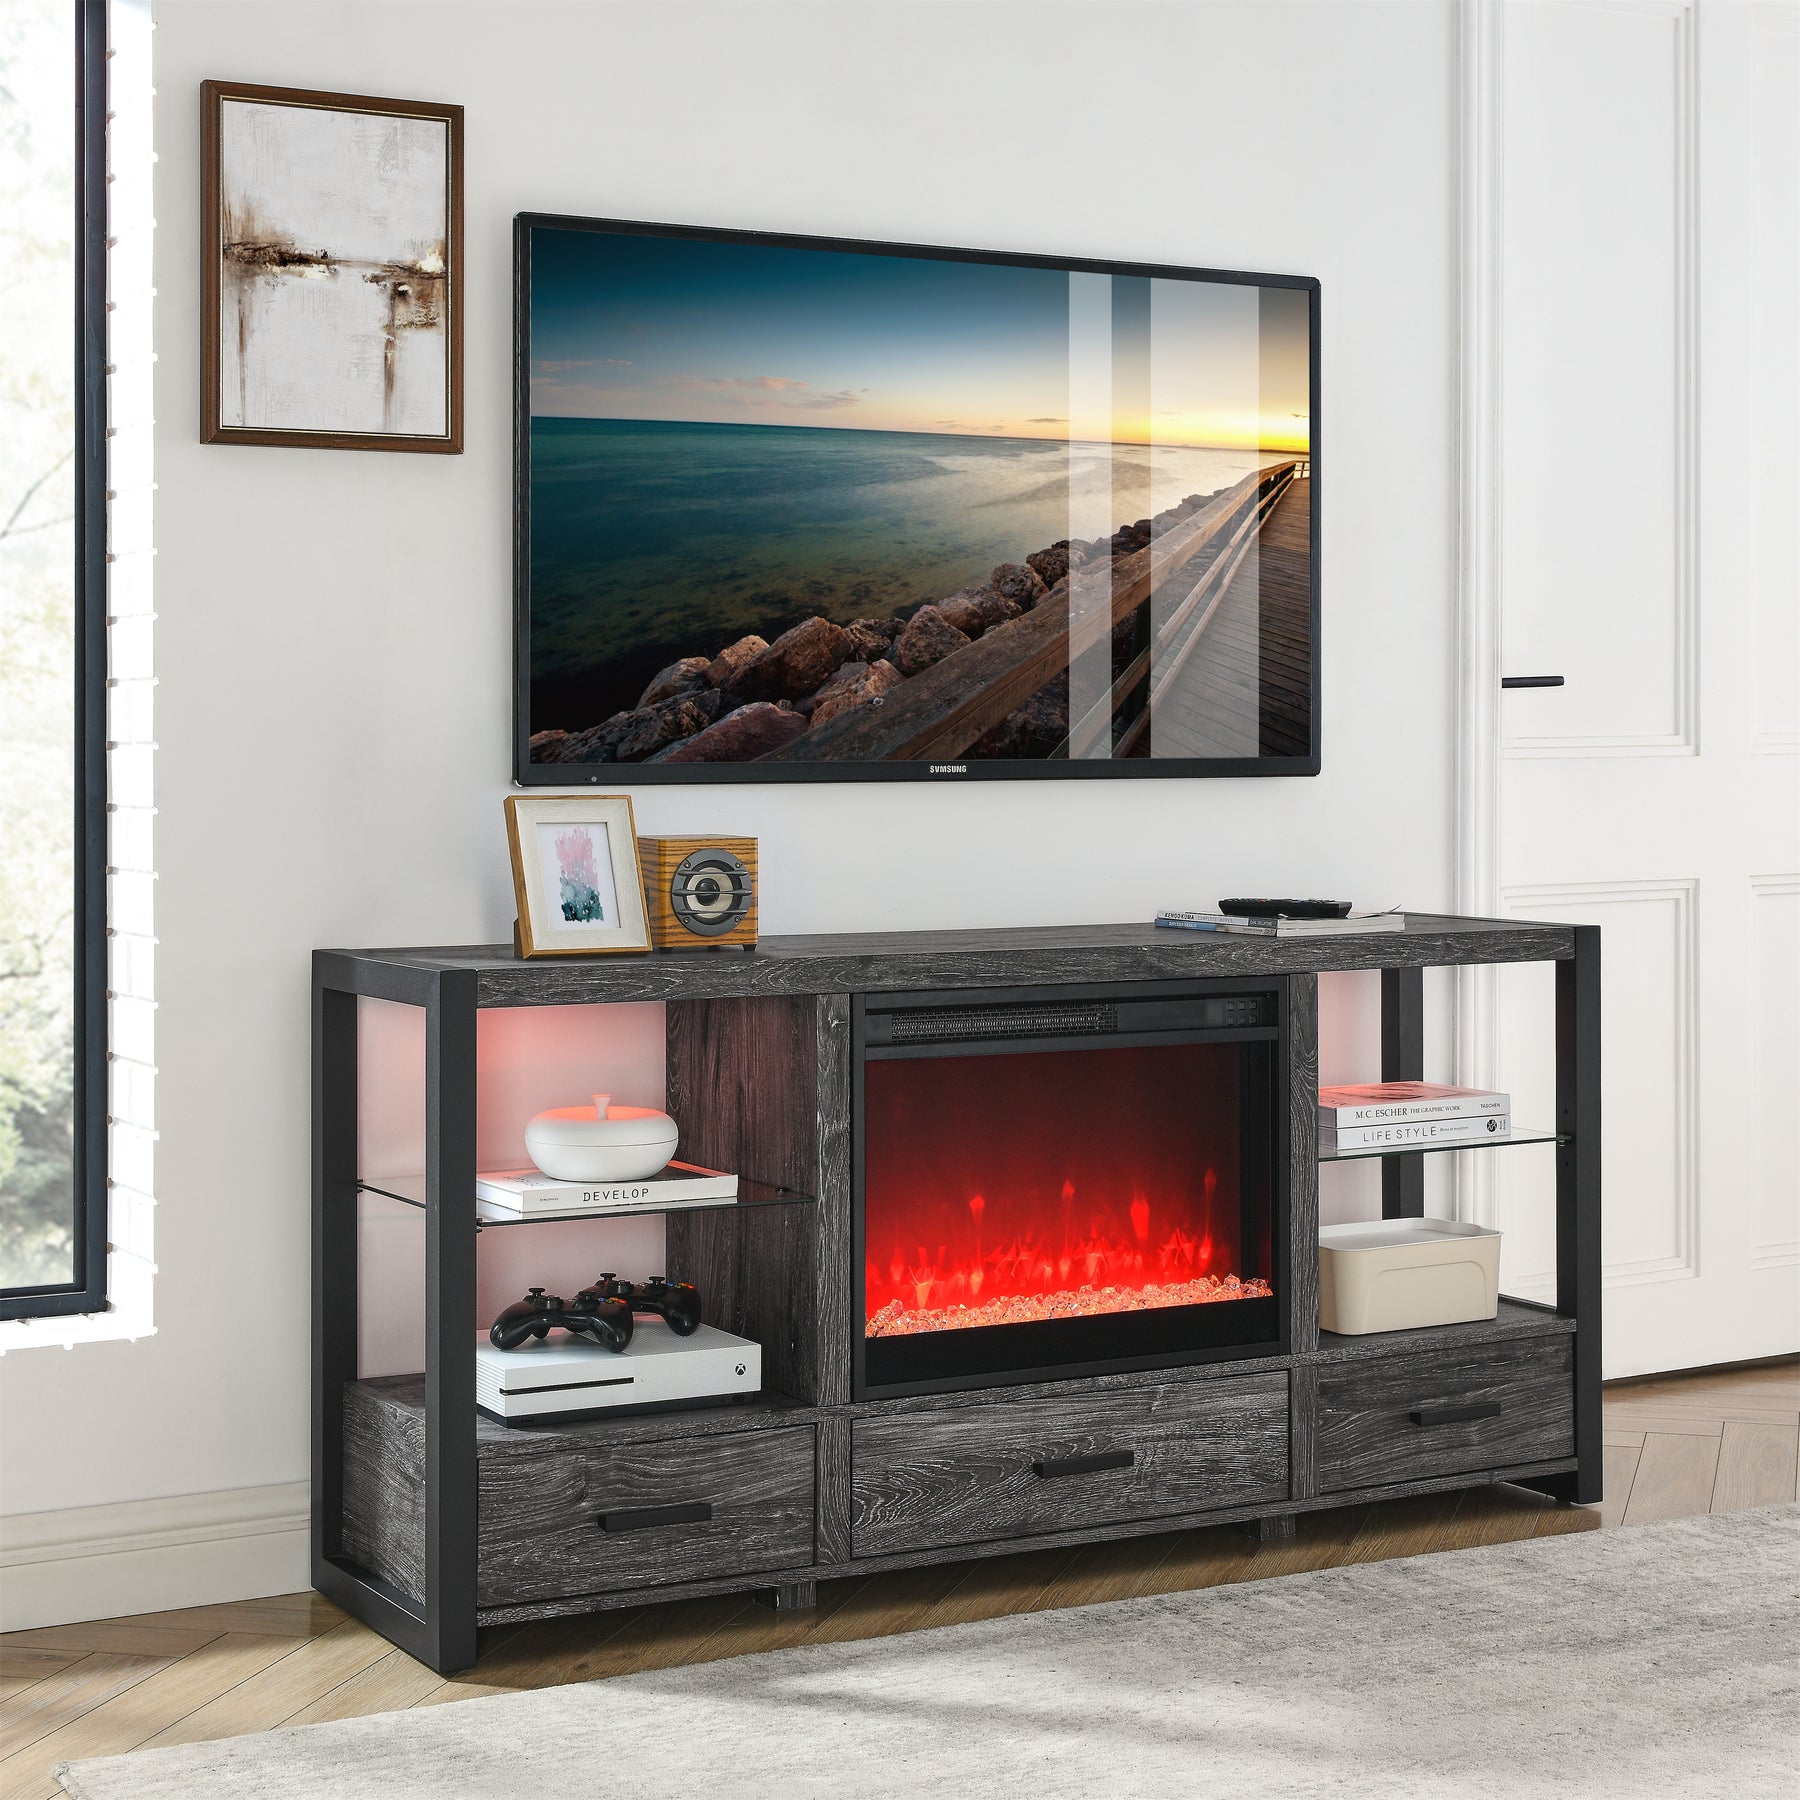 60 Inch Electric Fireplace Media TV Stand With Sync Colorful LED Lights-Dark rustic oak color - Tonkn